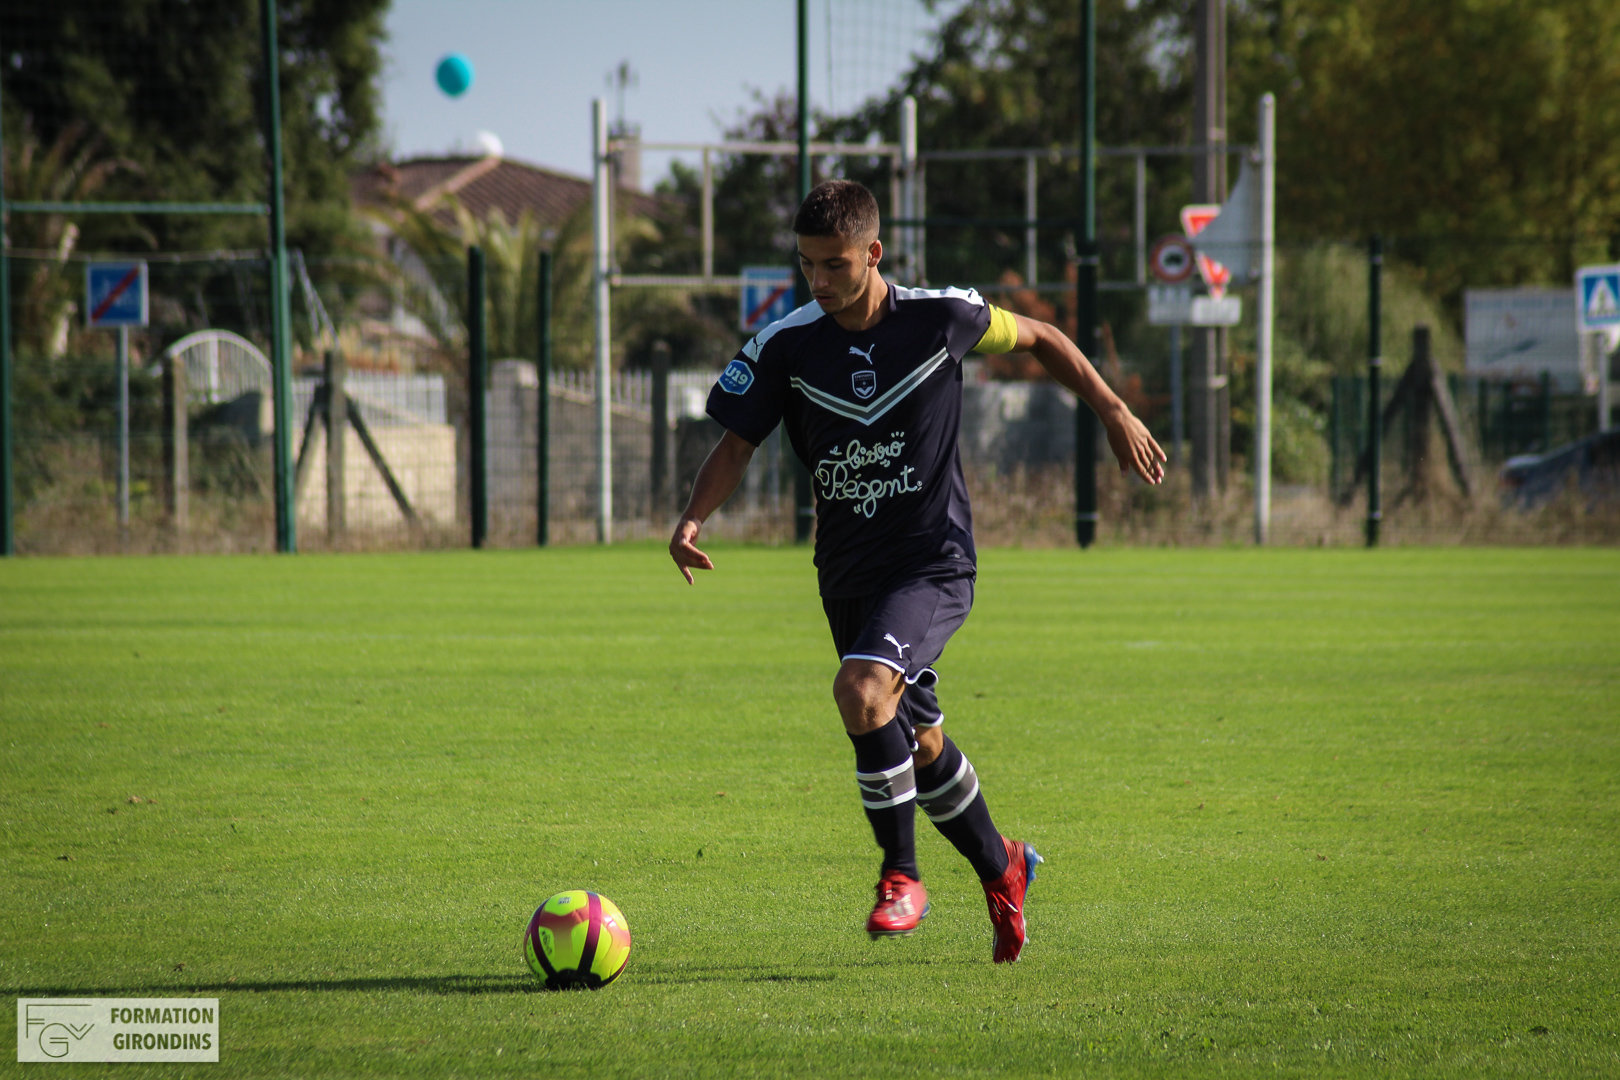 Cfa Girondins : Premier revers pour les Girondins contre Angers - Formation Girondins 